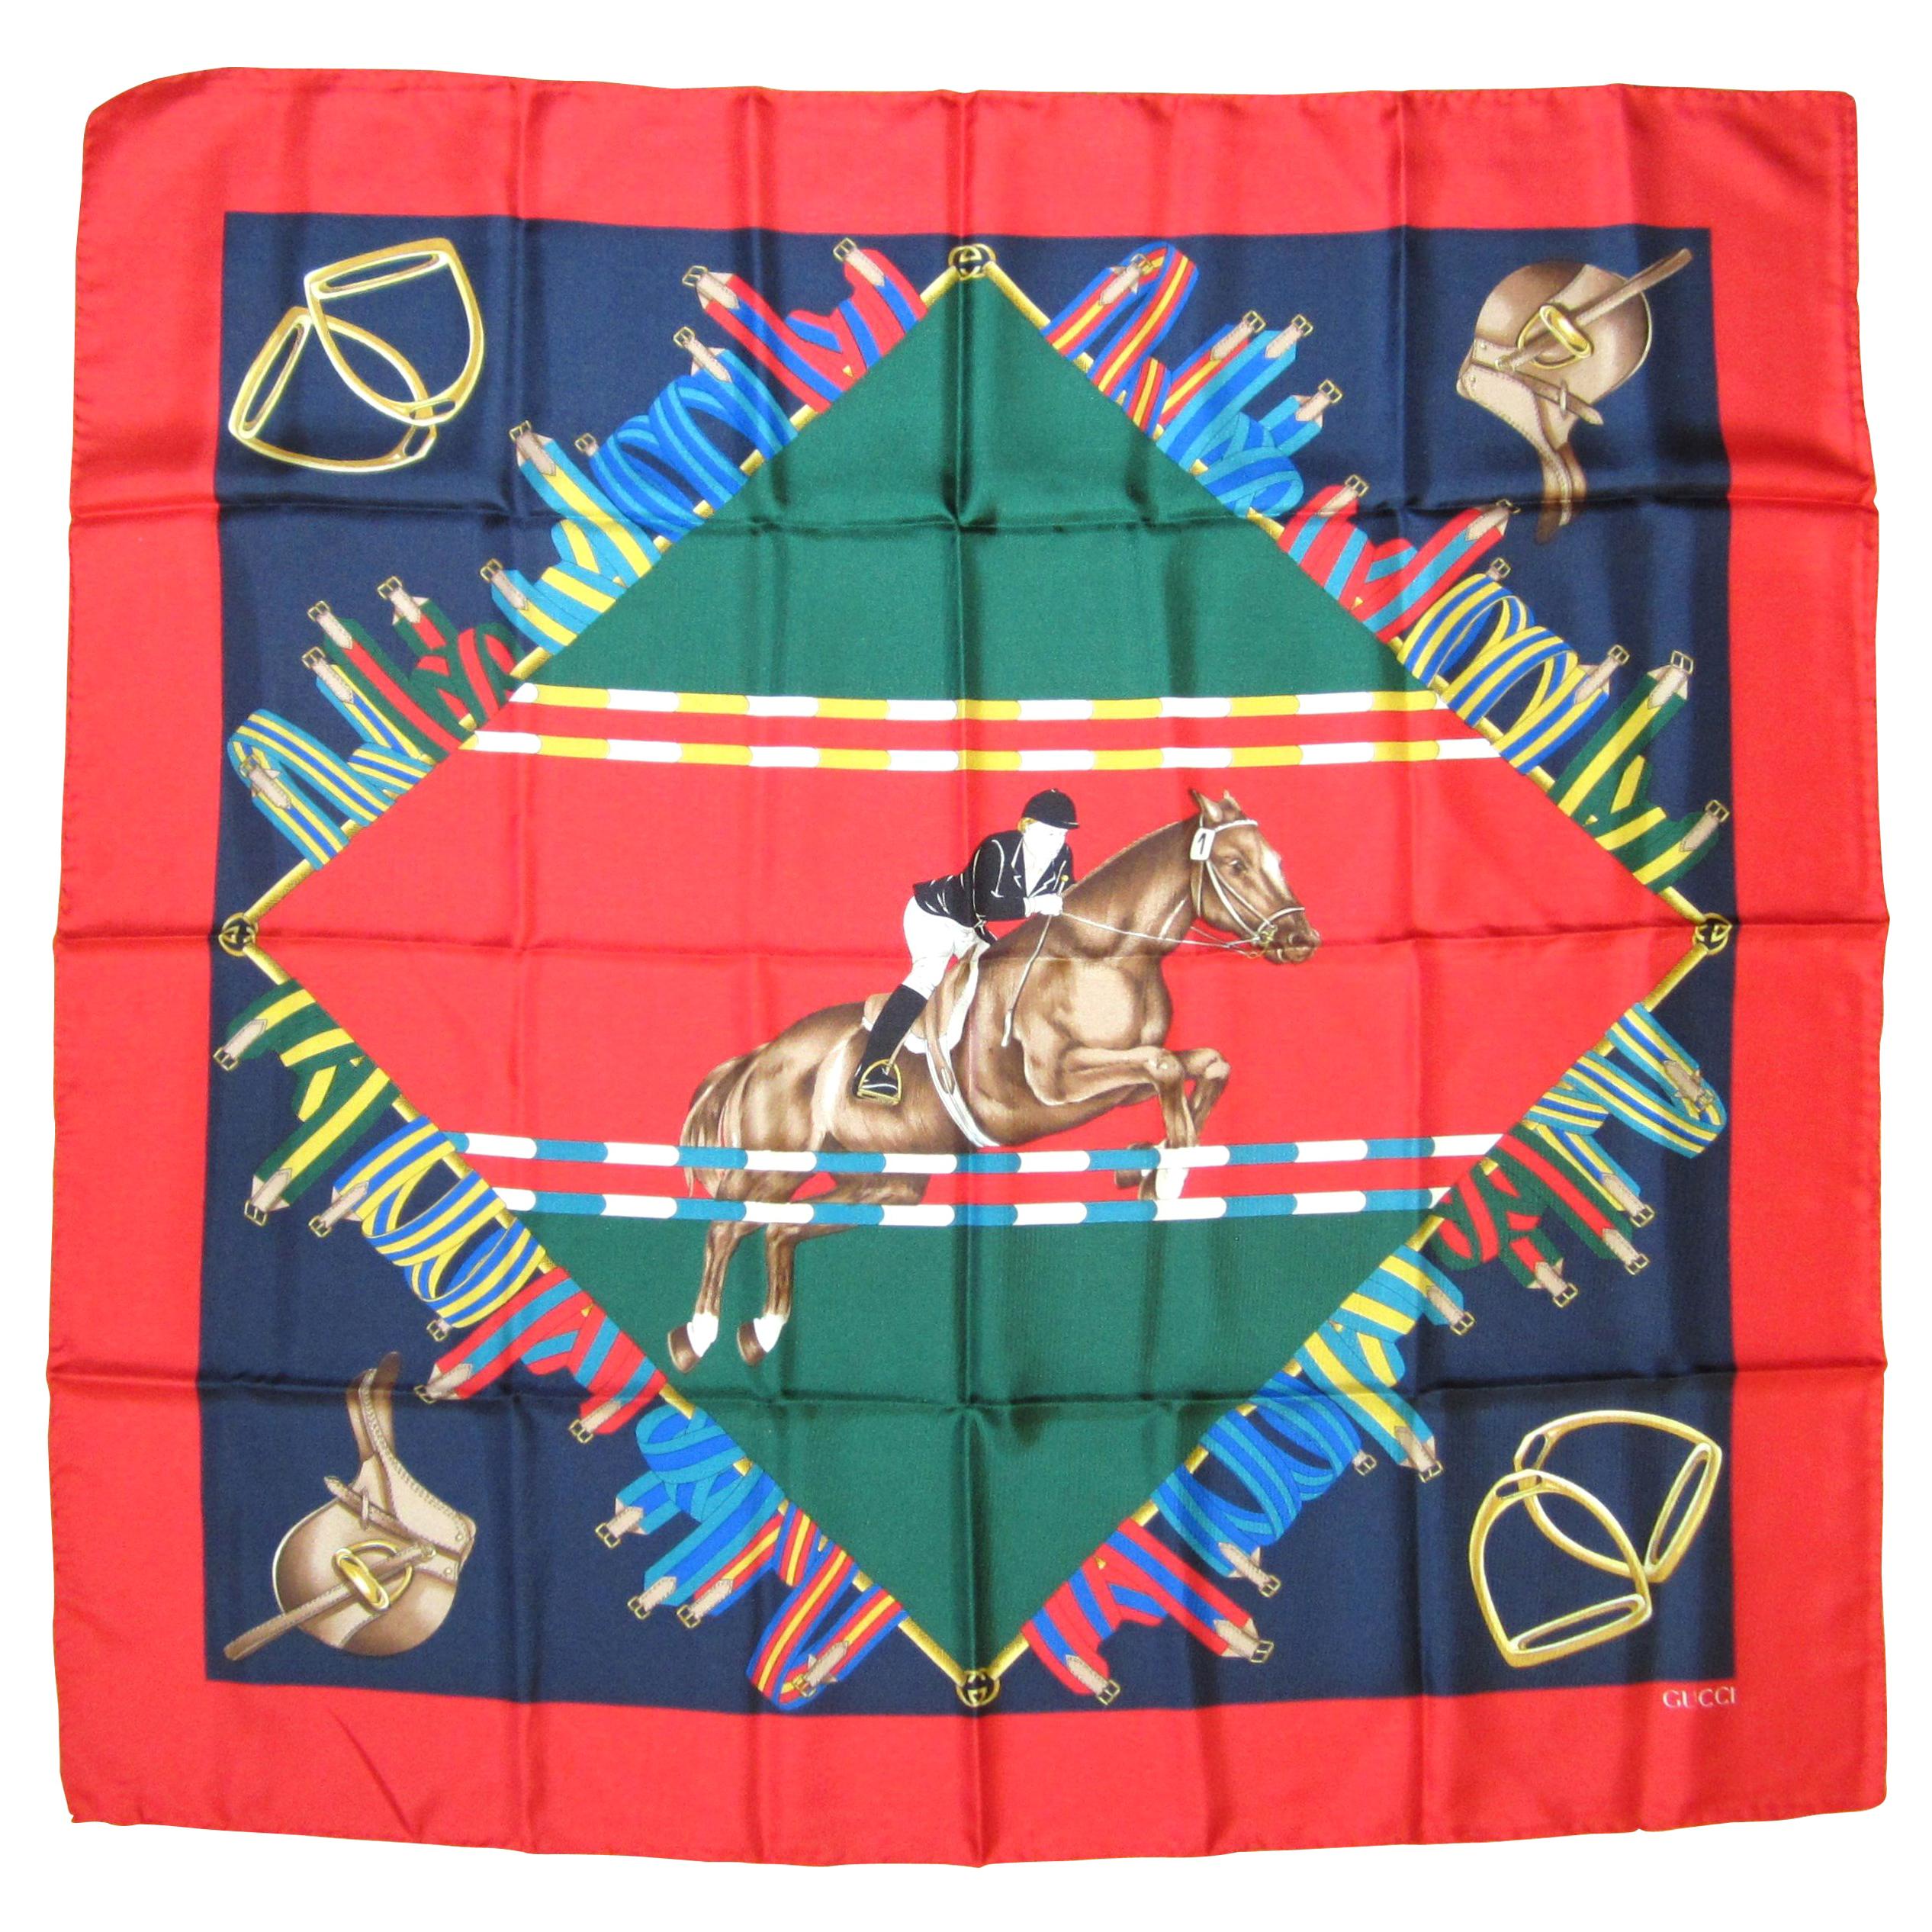 Gucci Silk Scarf Equestrian Horse Jumping New, Never worn 1990s 